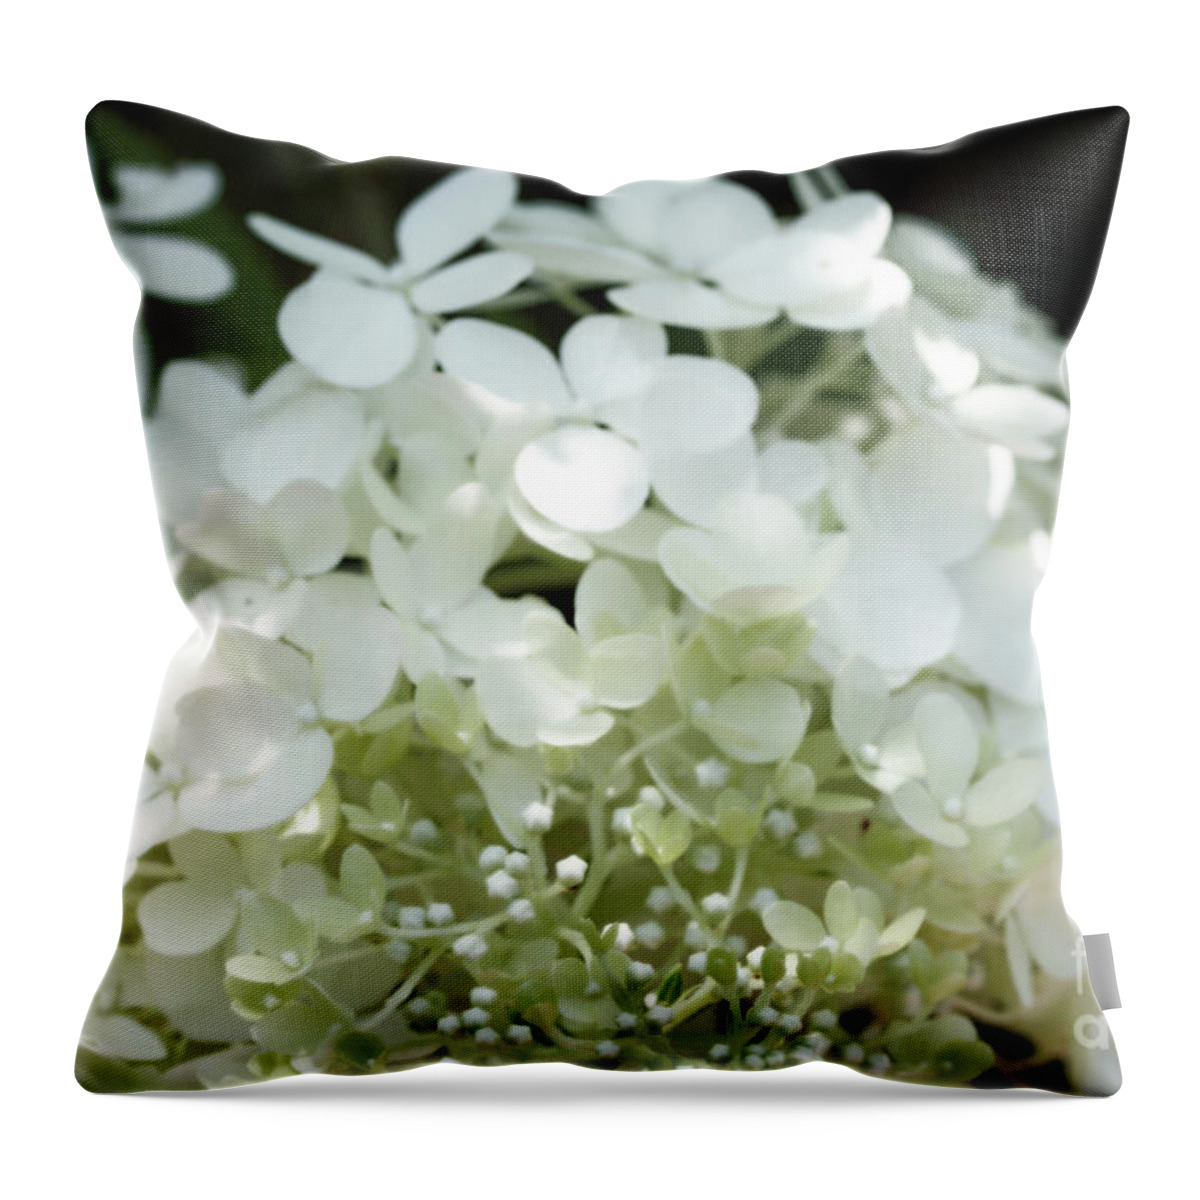  Floral Throw Pillow featuring the photograph White Hydrangea I by Mary Haber